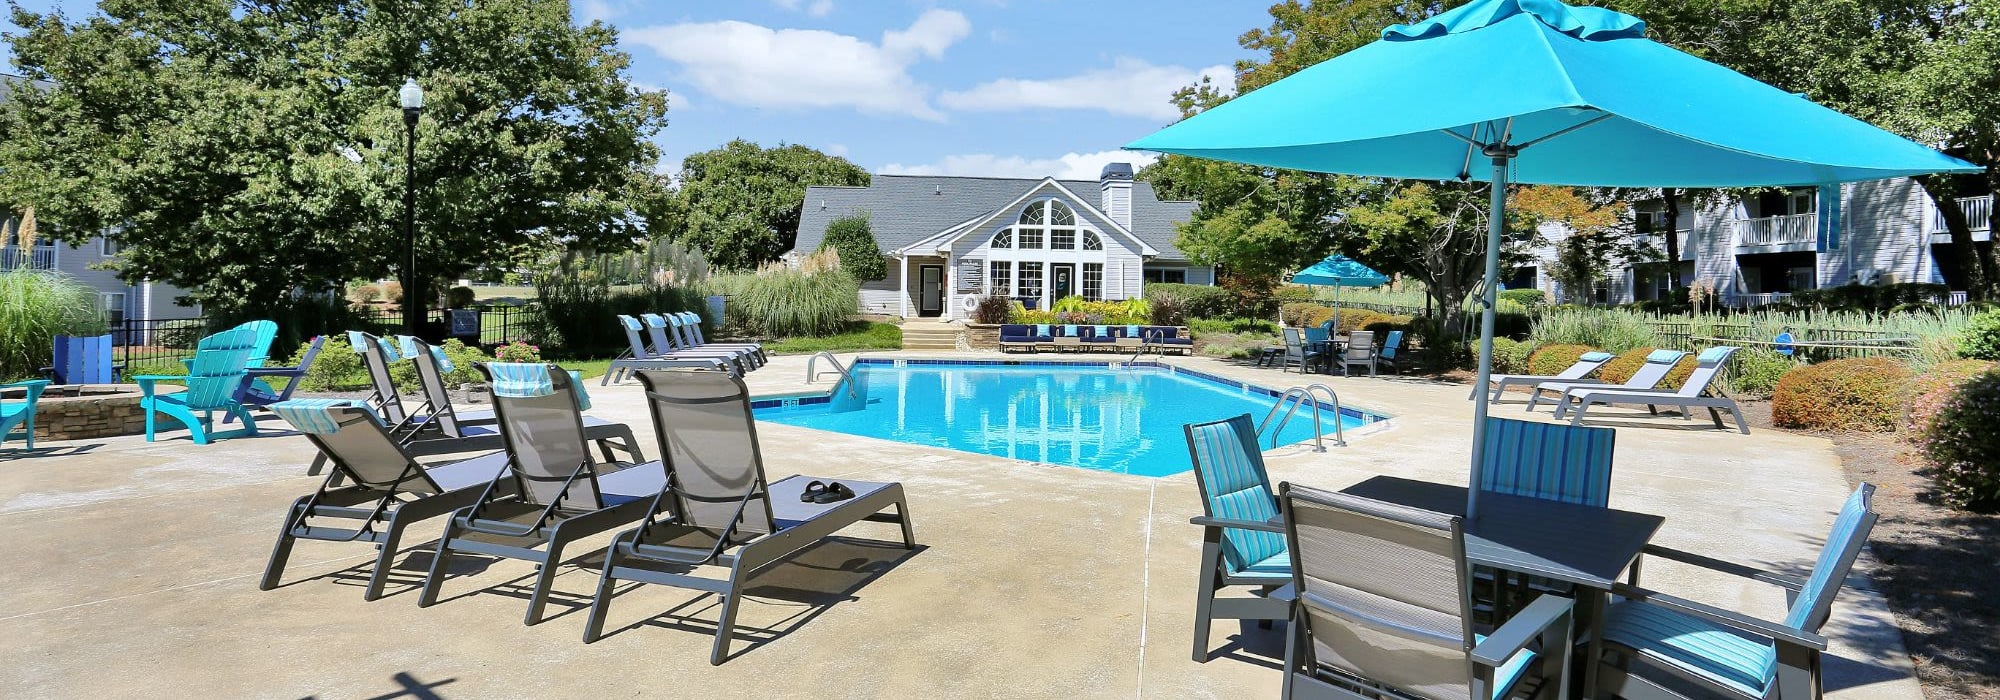 Schedule a Tour at The Willows Apartments in Spartanburg, South Carolina